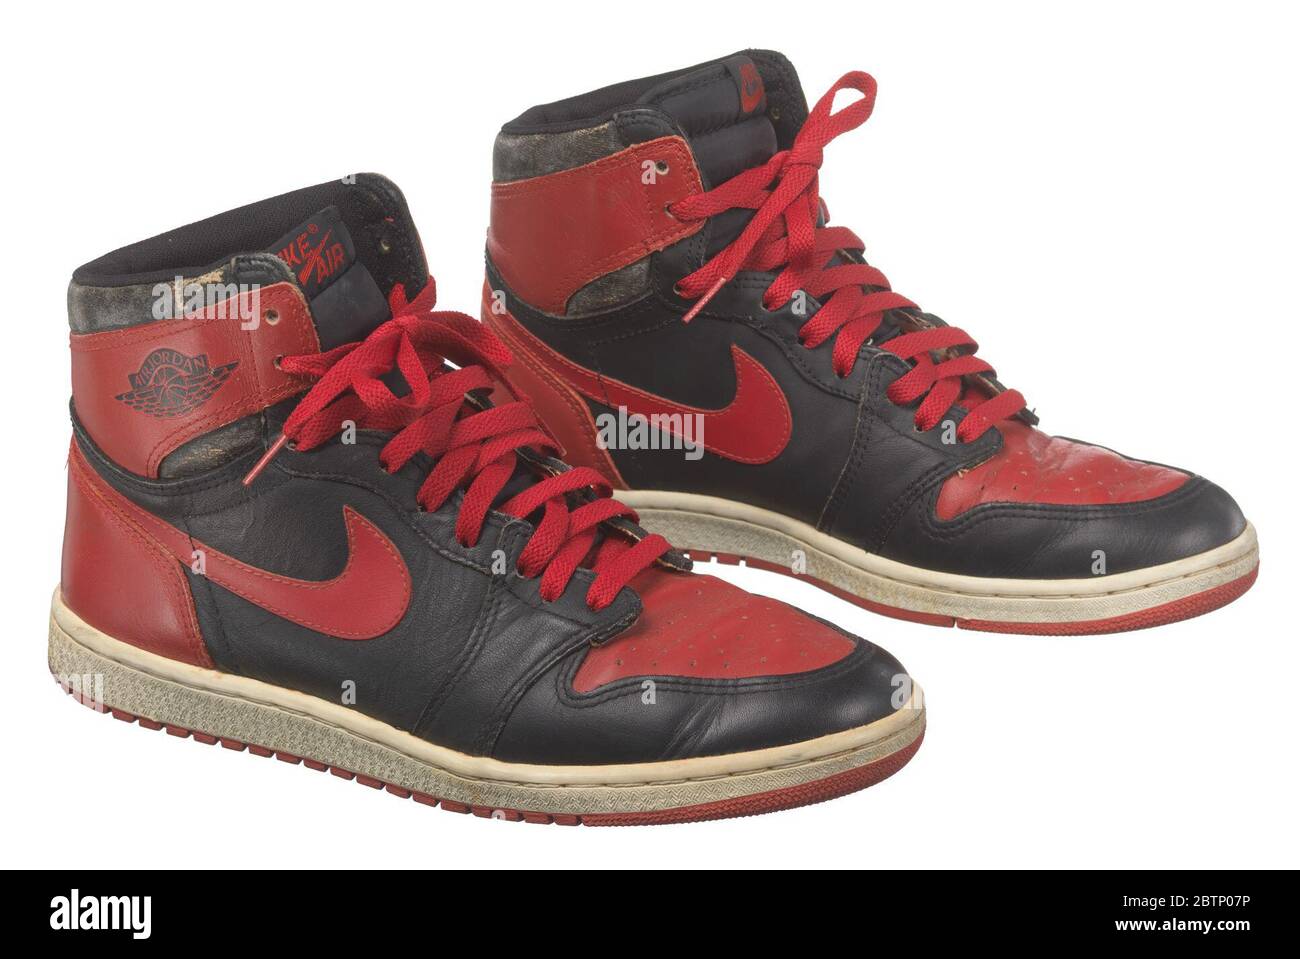 Air Jordan Sneakers High Resolution Stock Photography and Images - Alamy